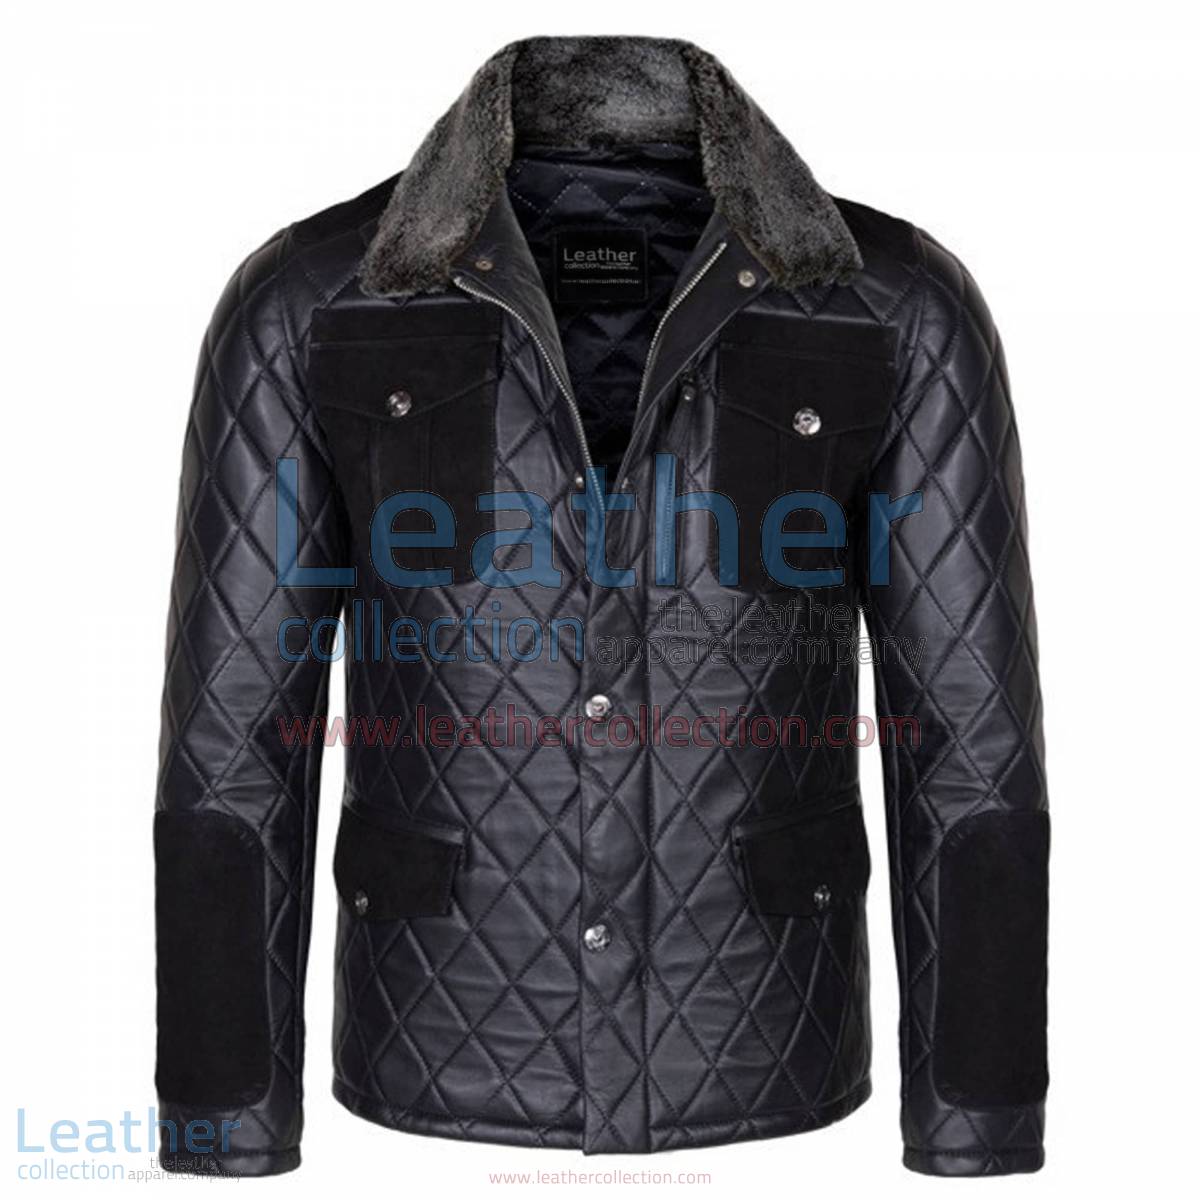 Diamond Leather Jacket with Fur Collar & Flapped Pockets